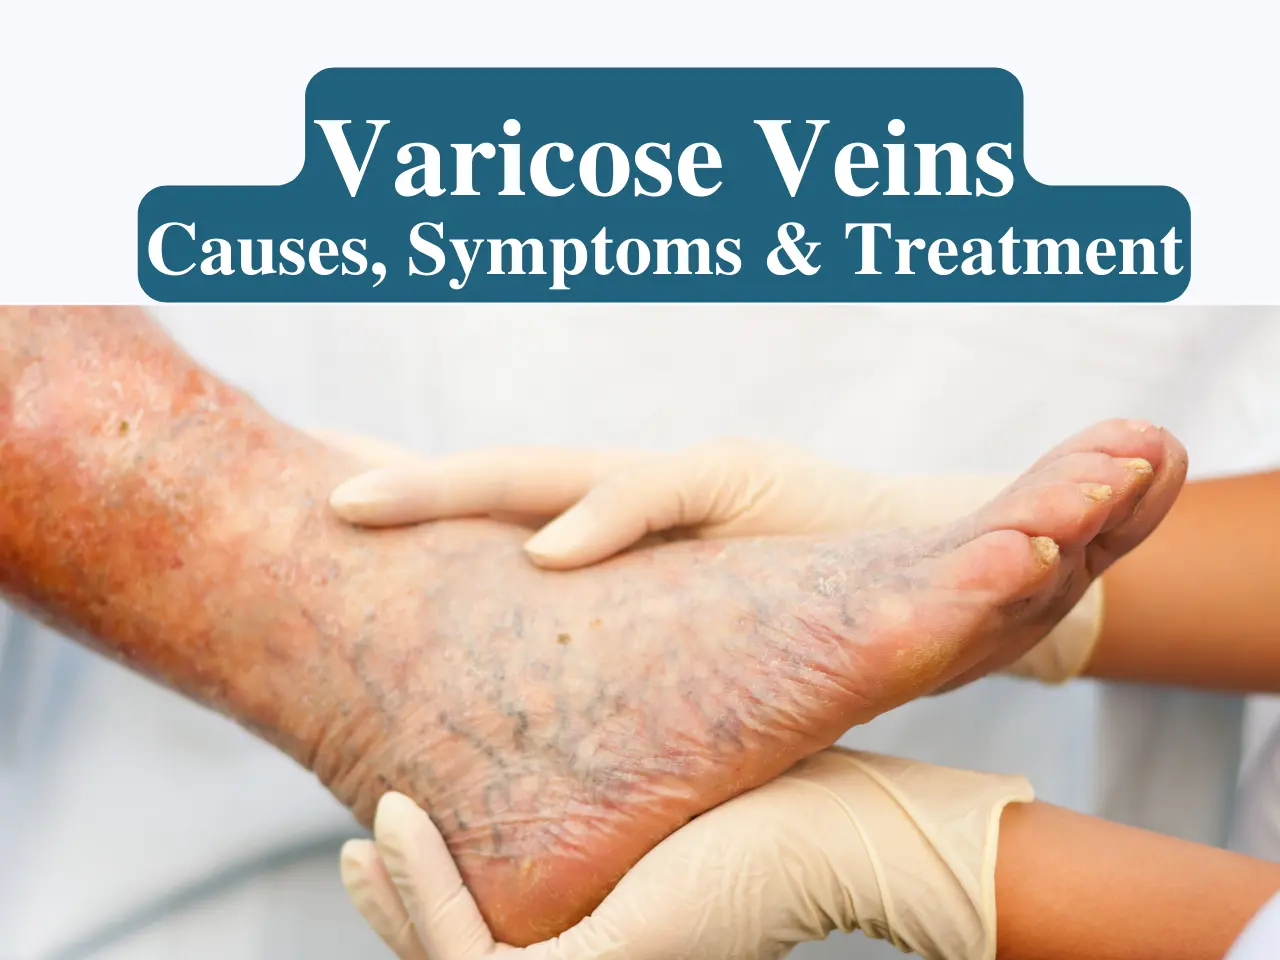 Varicose Veins: Causes, Symptoms and Treatment